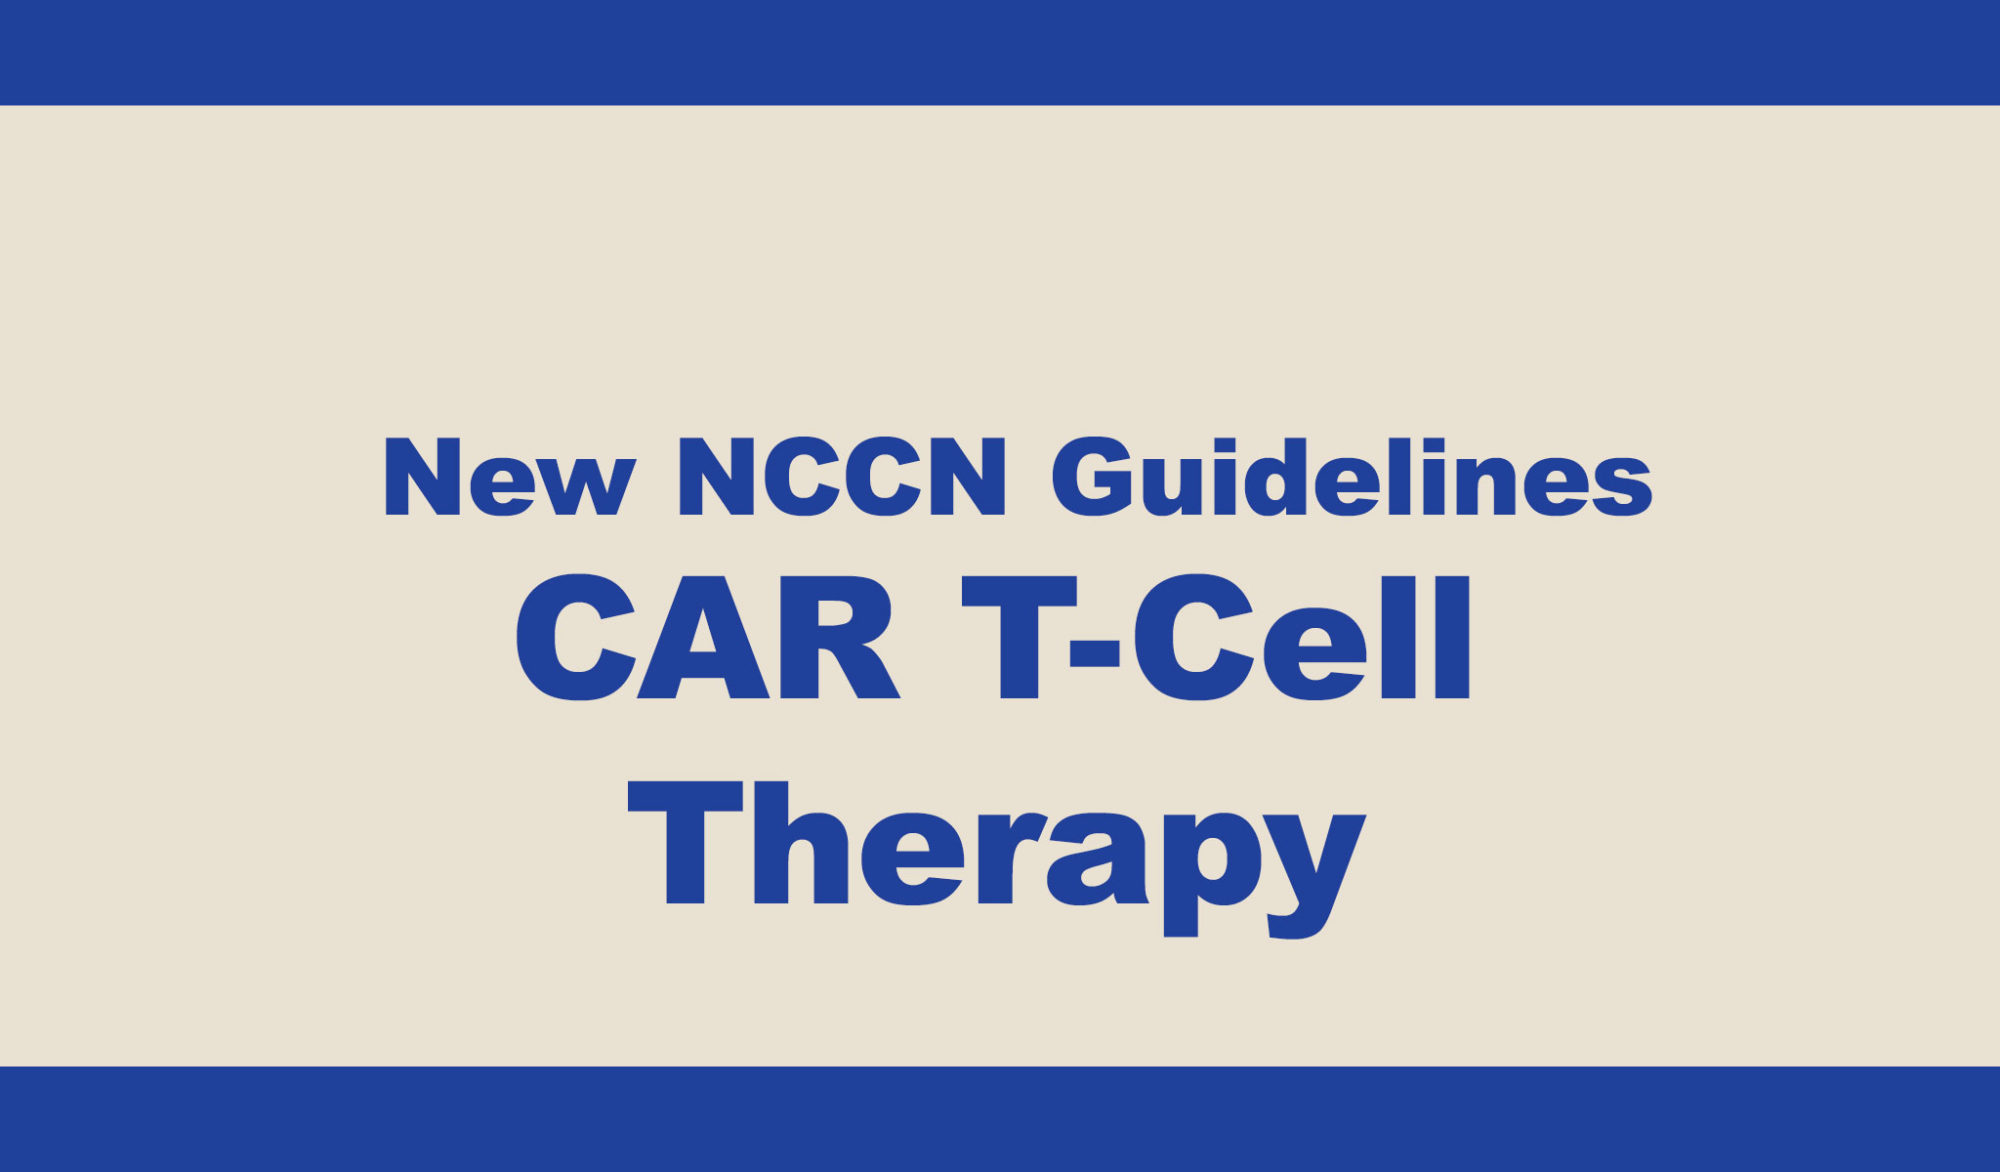 CAR T-Cell Therapy: